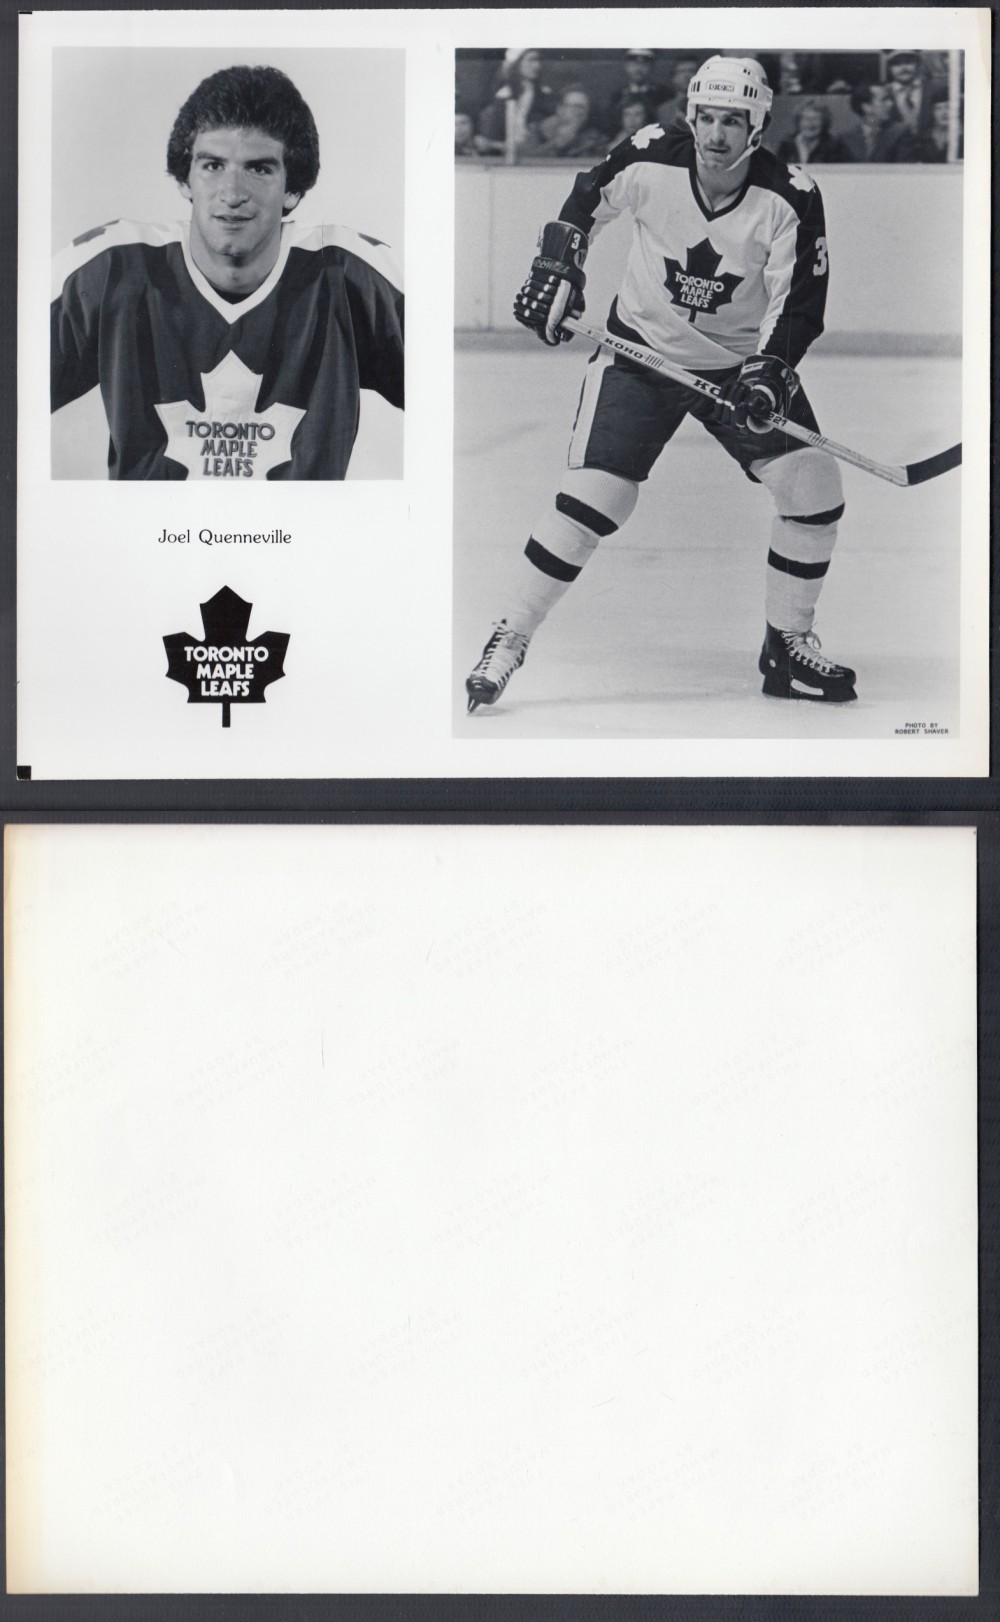 EARLY 1980'S TORONTO MAPLE LEAFS MEDIA PHOTO J. QUENNEVILLE photo